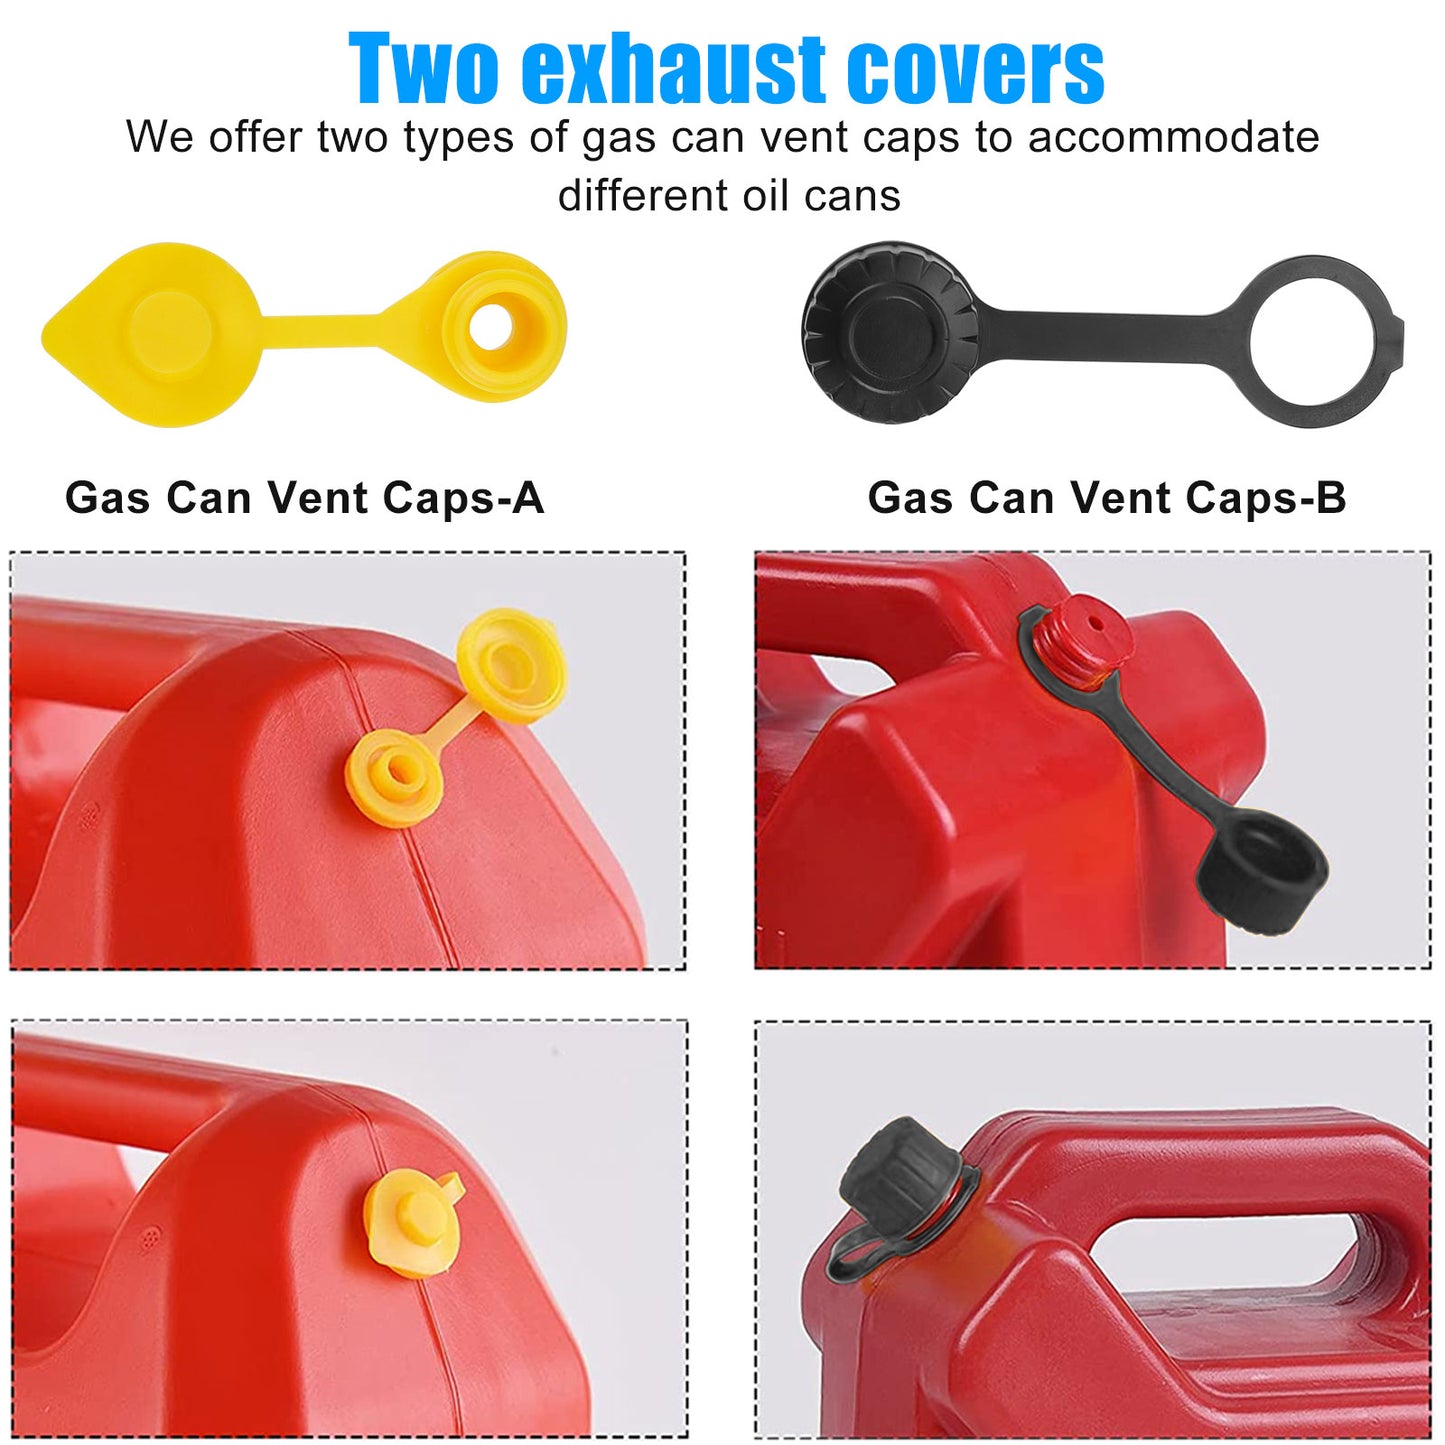 Fuel Can Spout Kit - Upgraded Design for Easy and Leak-Free Fuel Dispensing